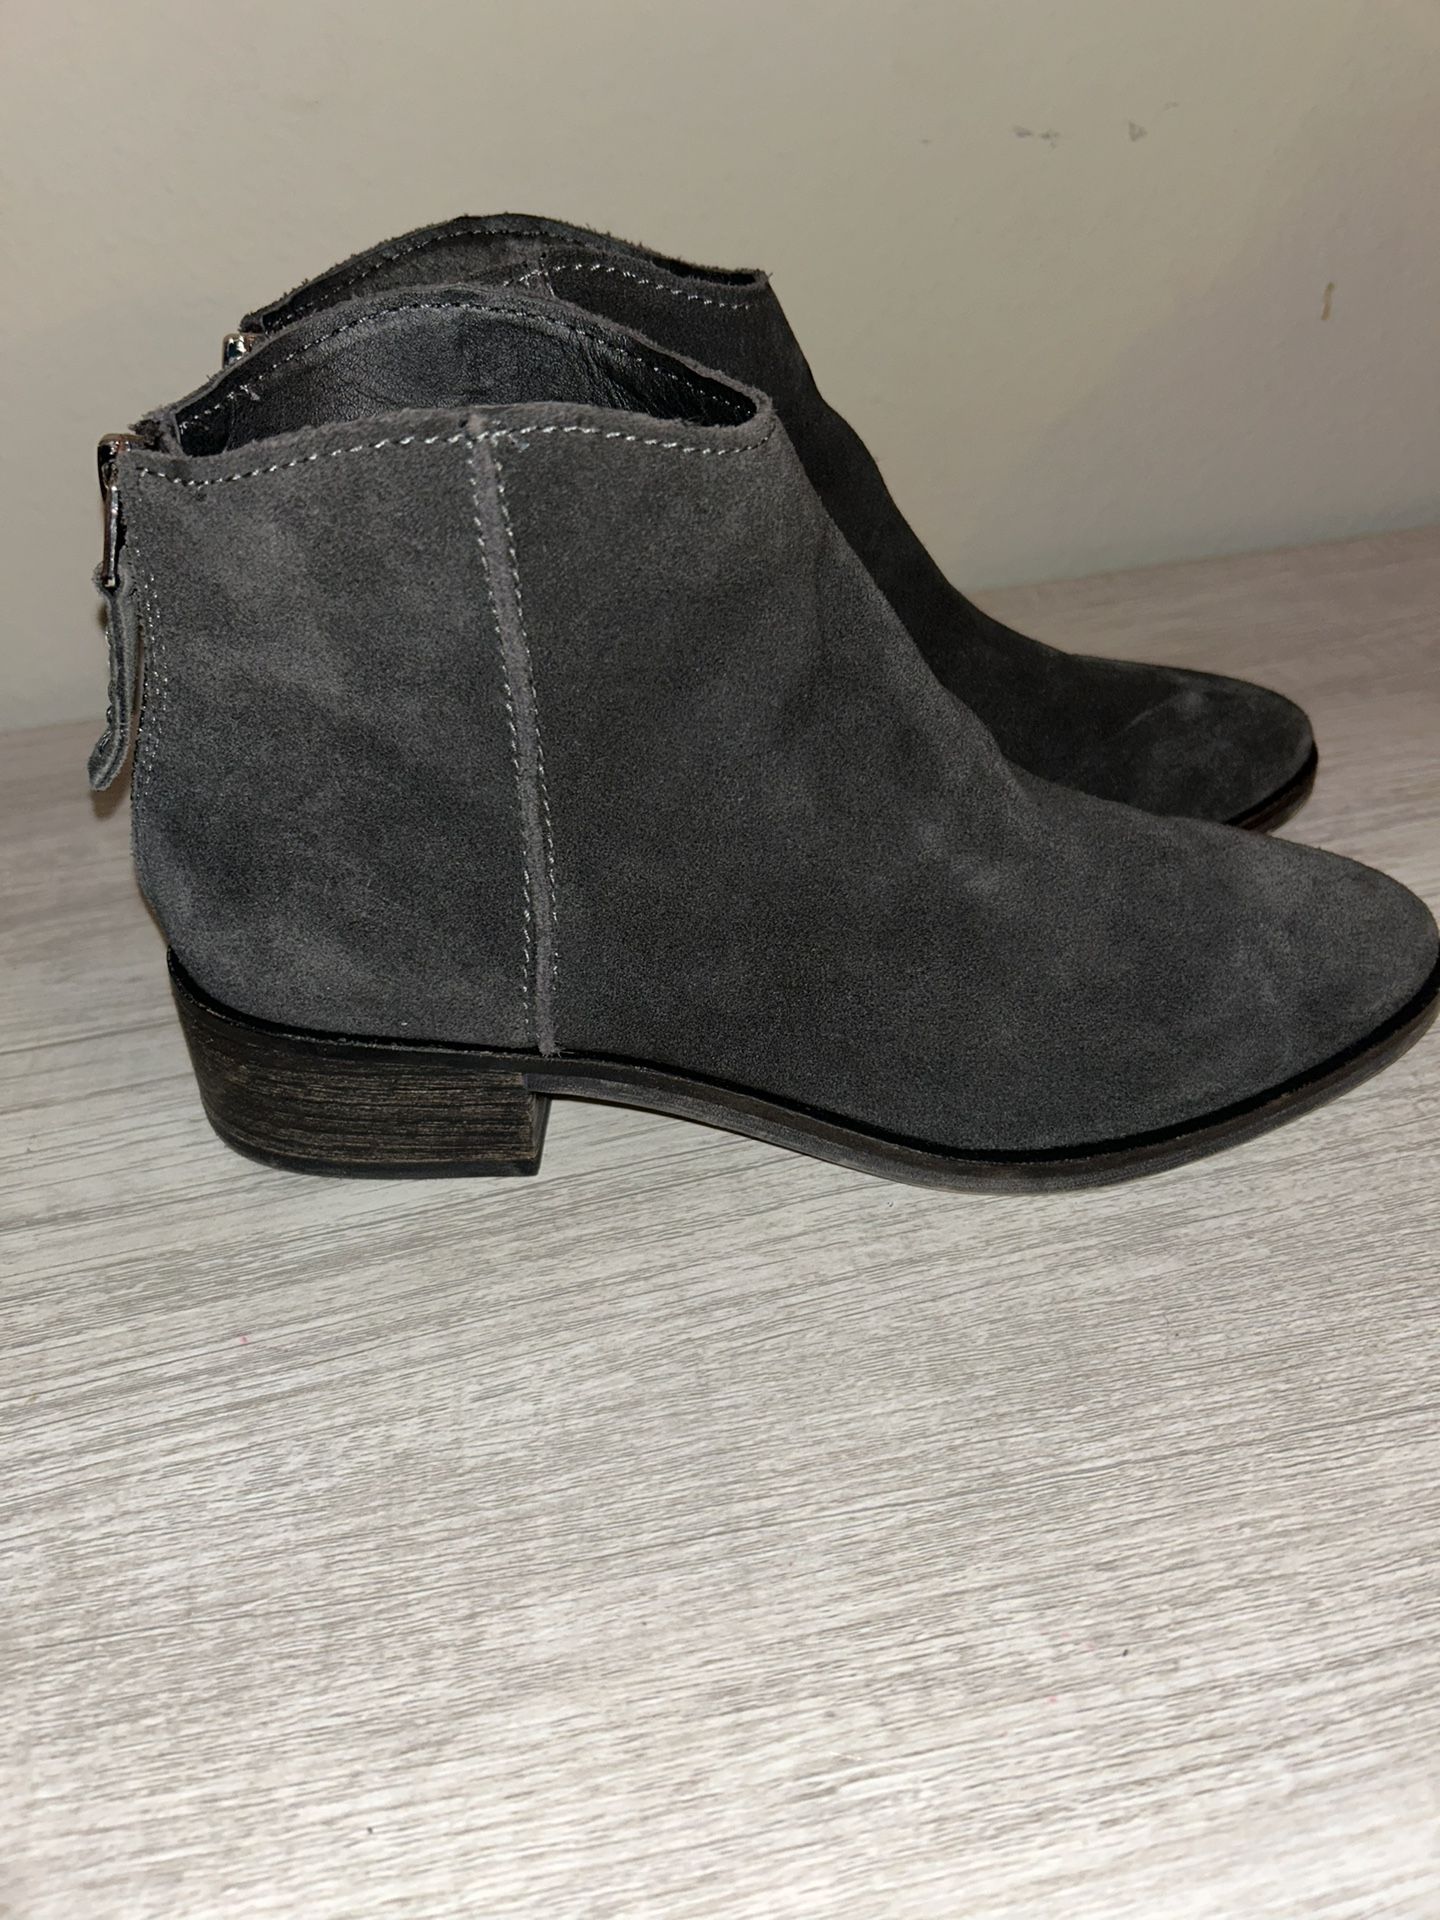 Women’s Size 9.5 Grey Suede Ankle Boots